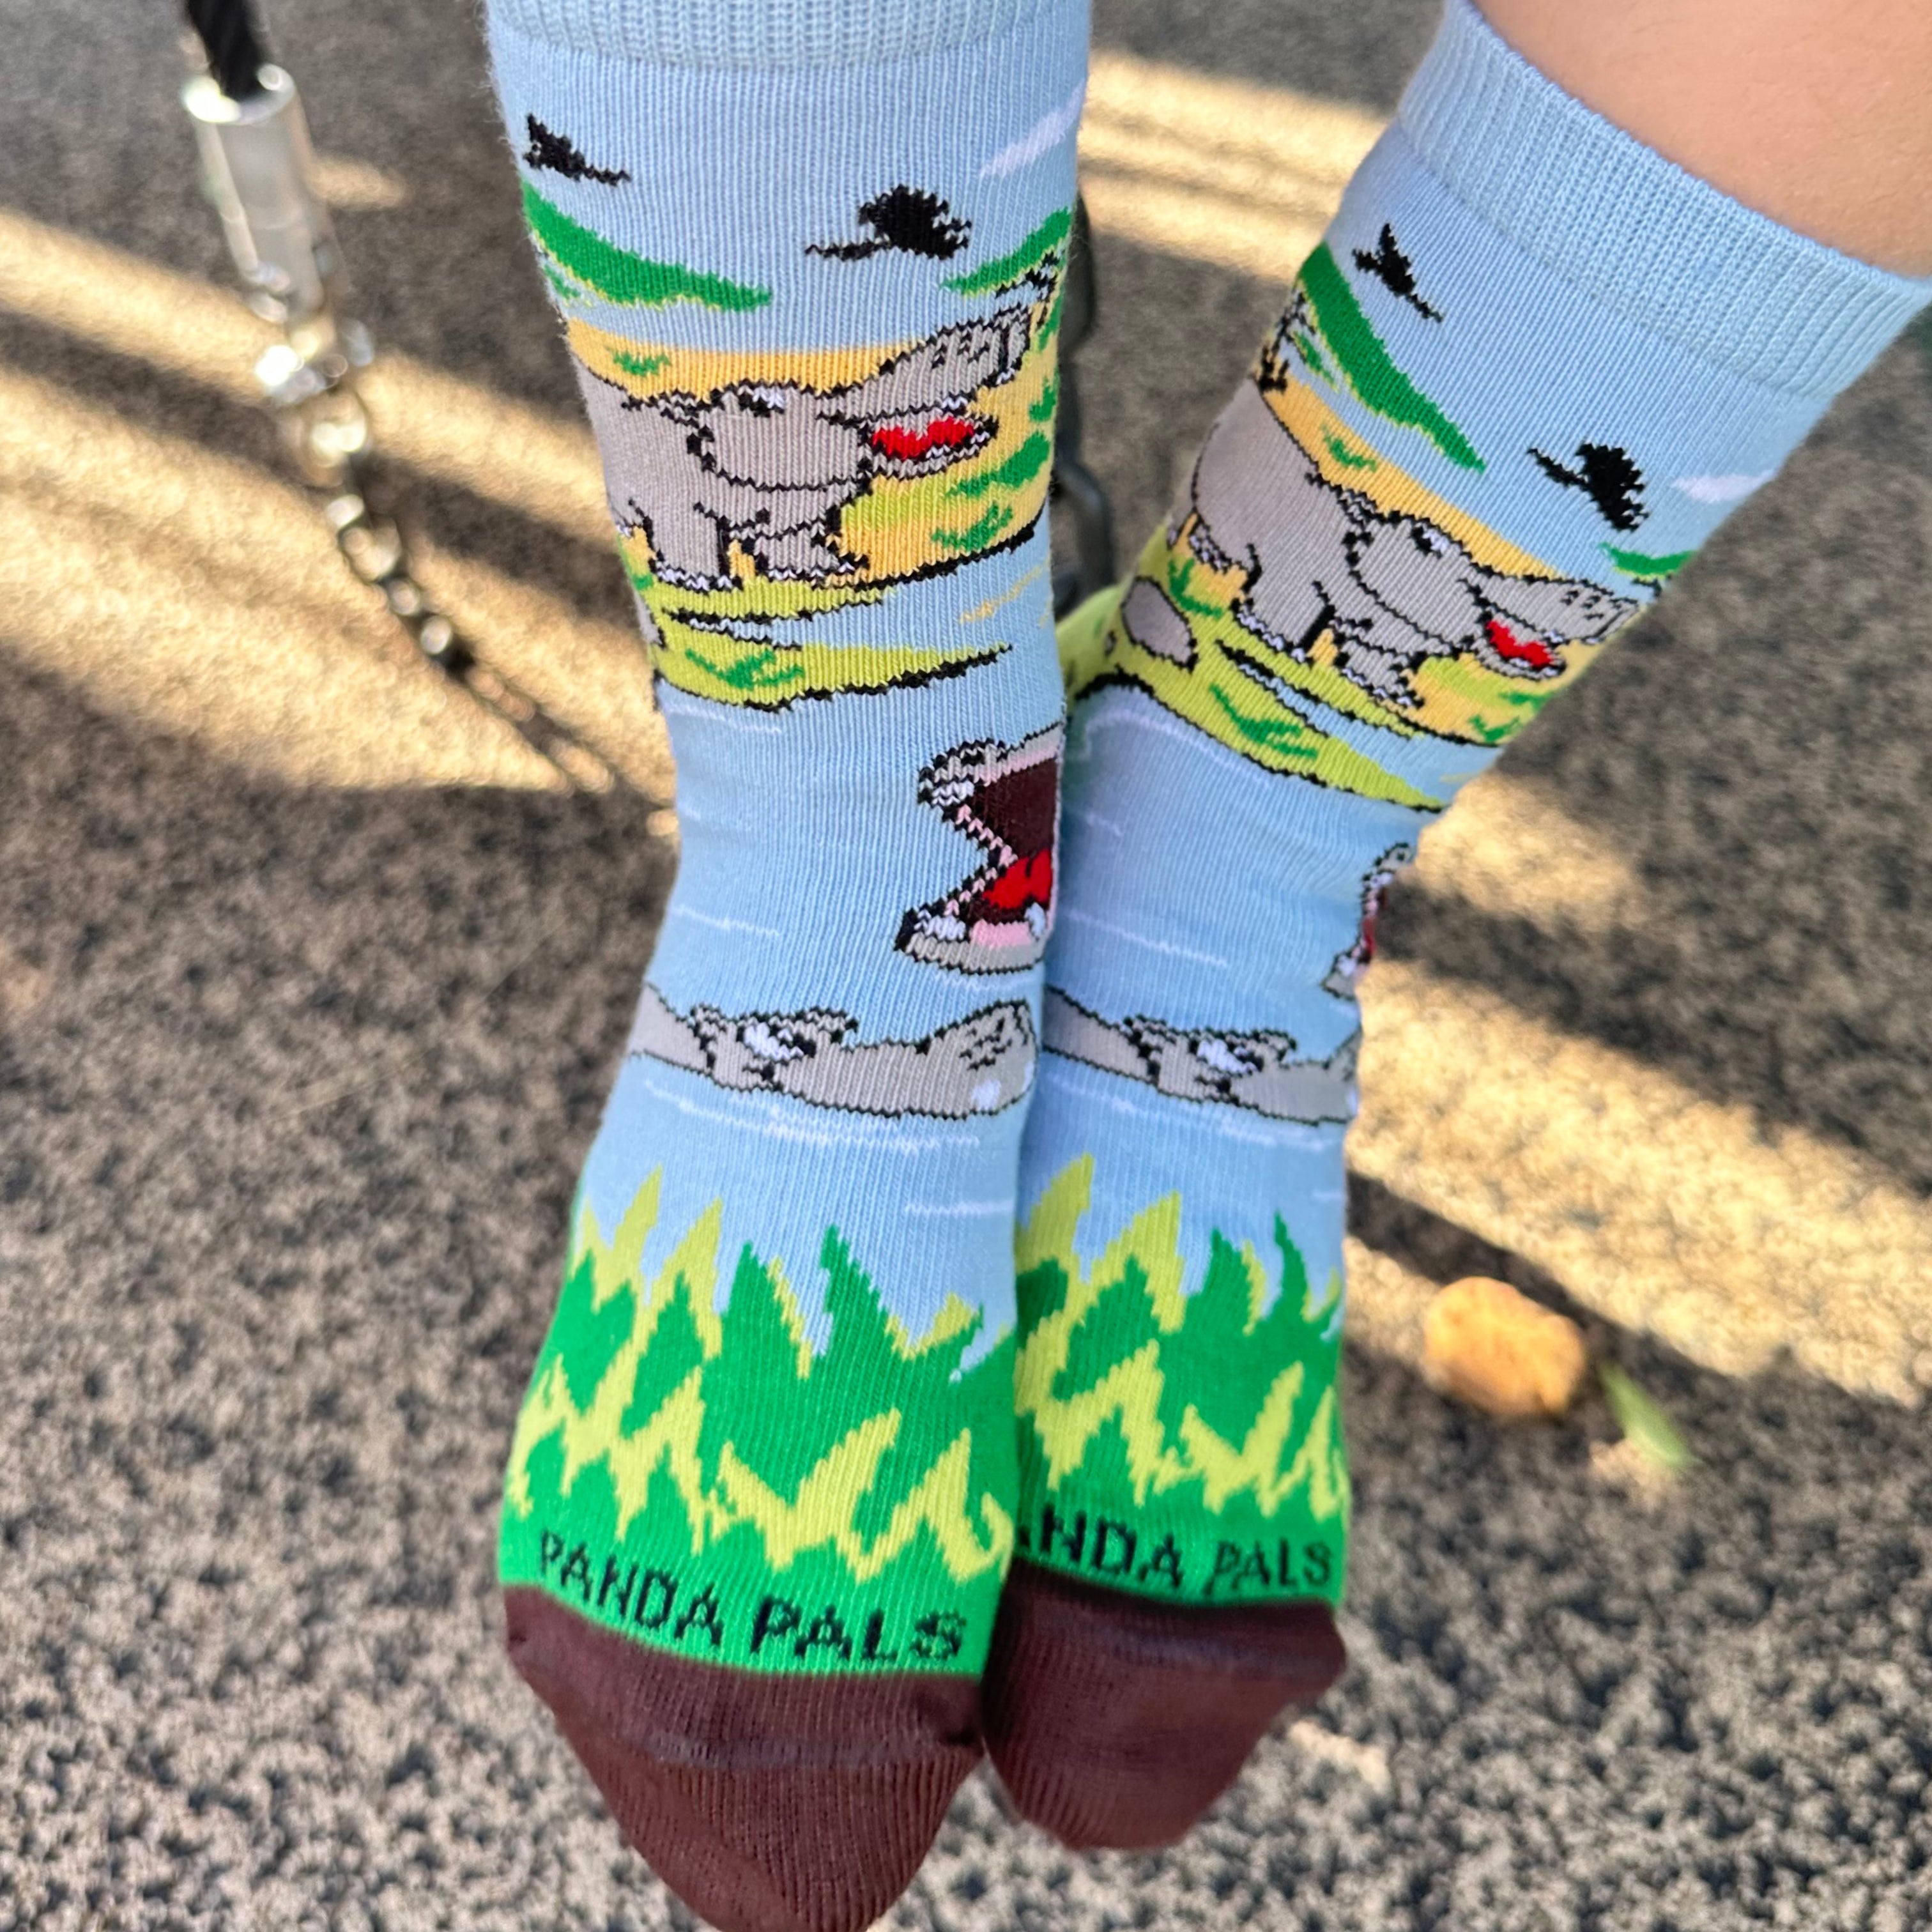 Hippos Playing in a Pond Socks from the Sock Panda (Ages 3-7)